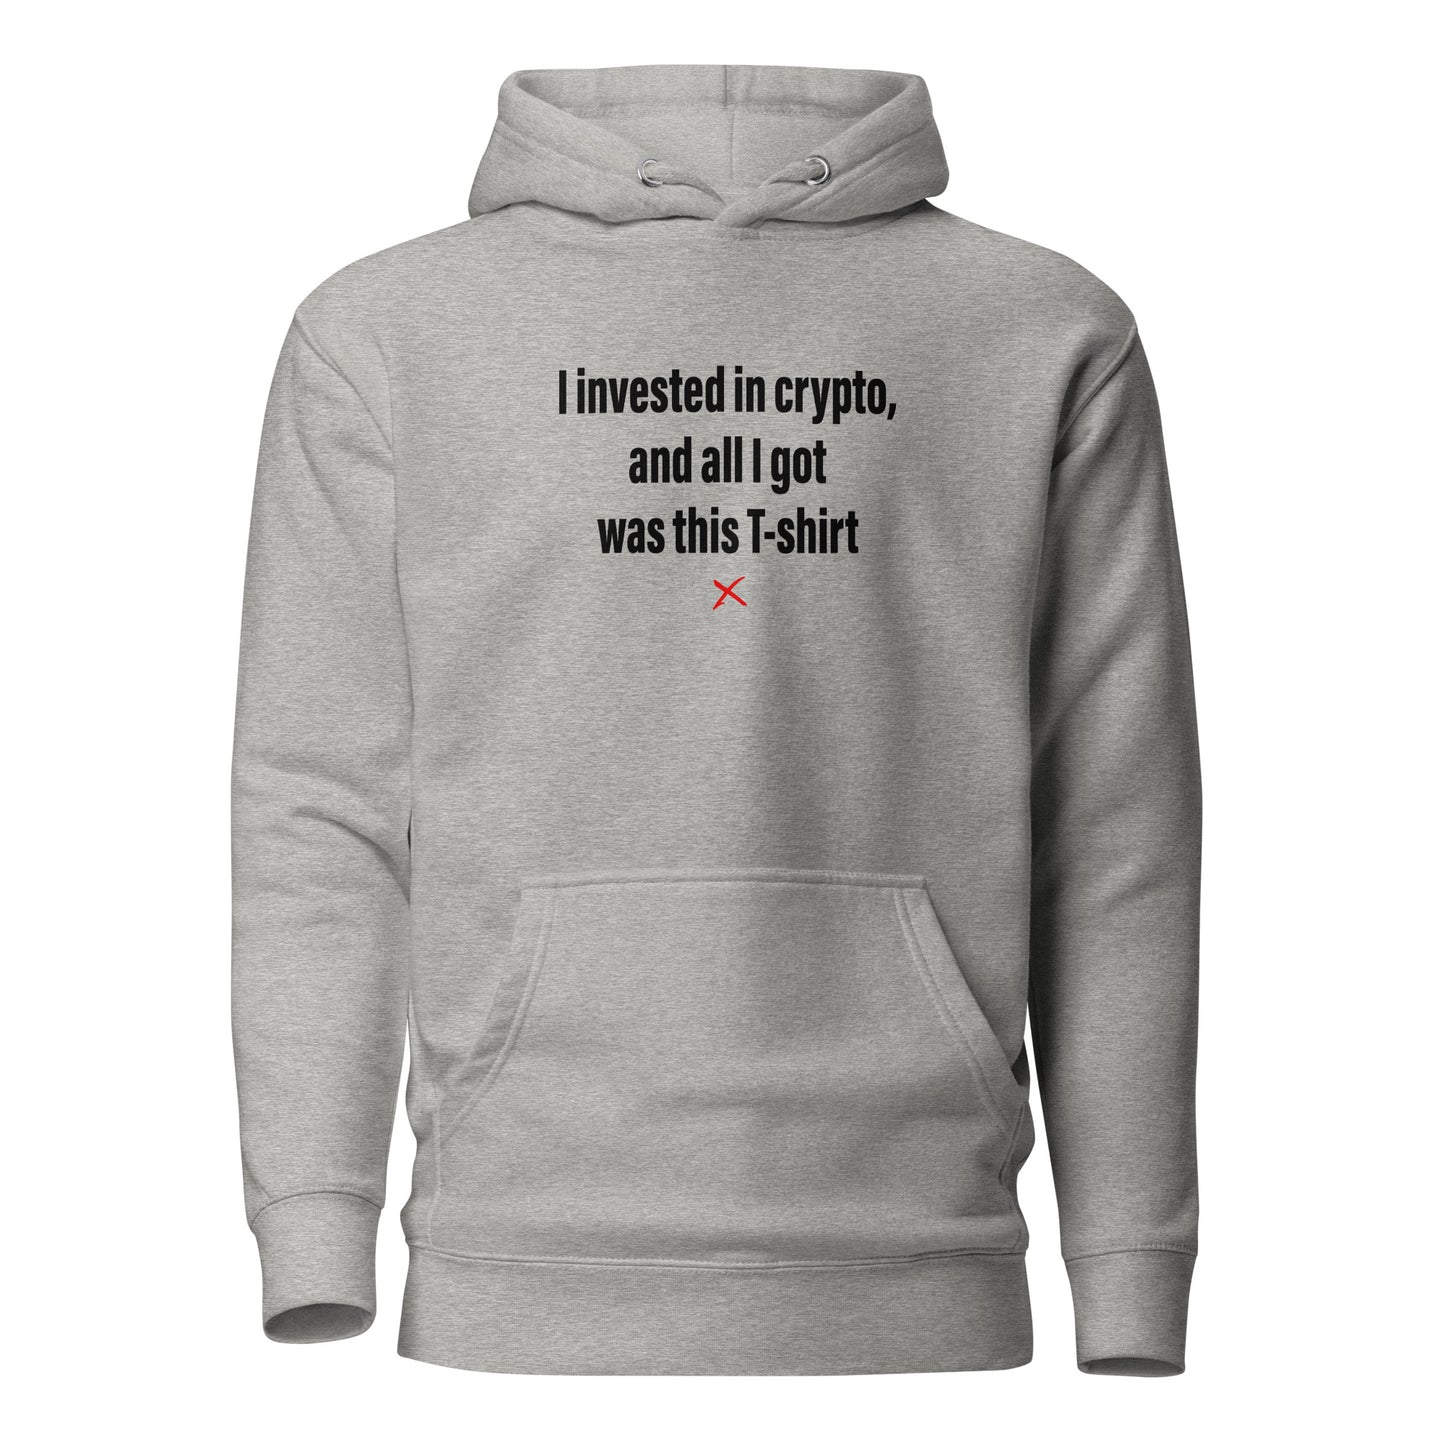 I invested in crypto, and all I got was this T-shirt - Hoodie